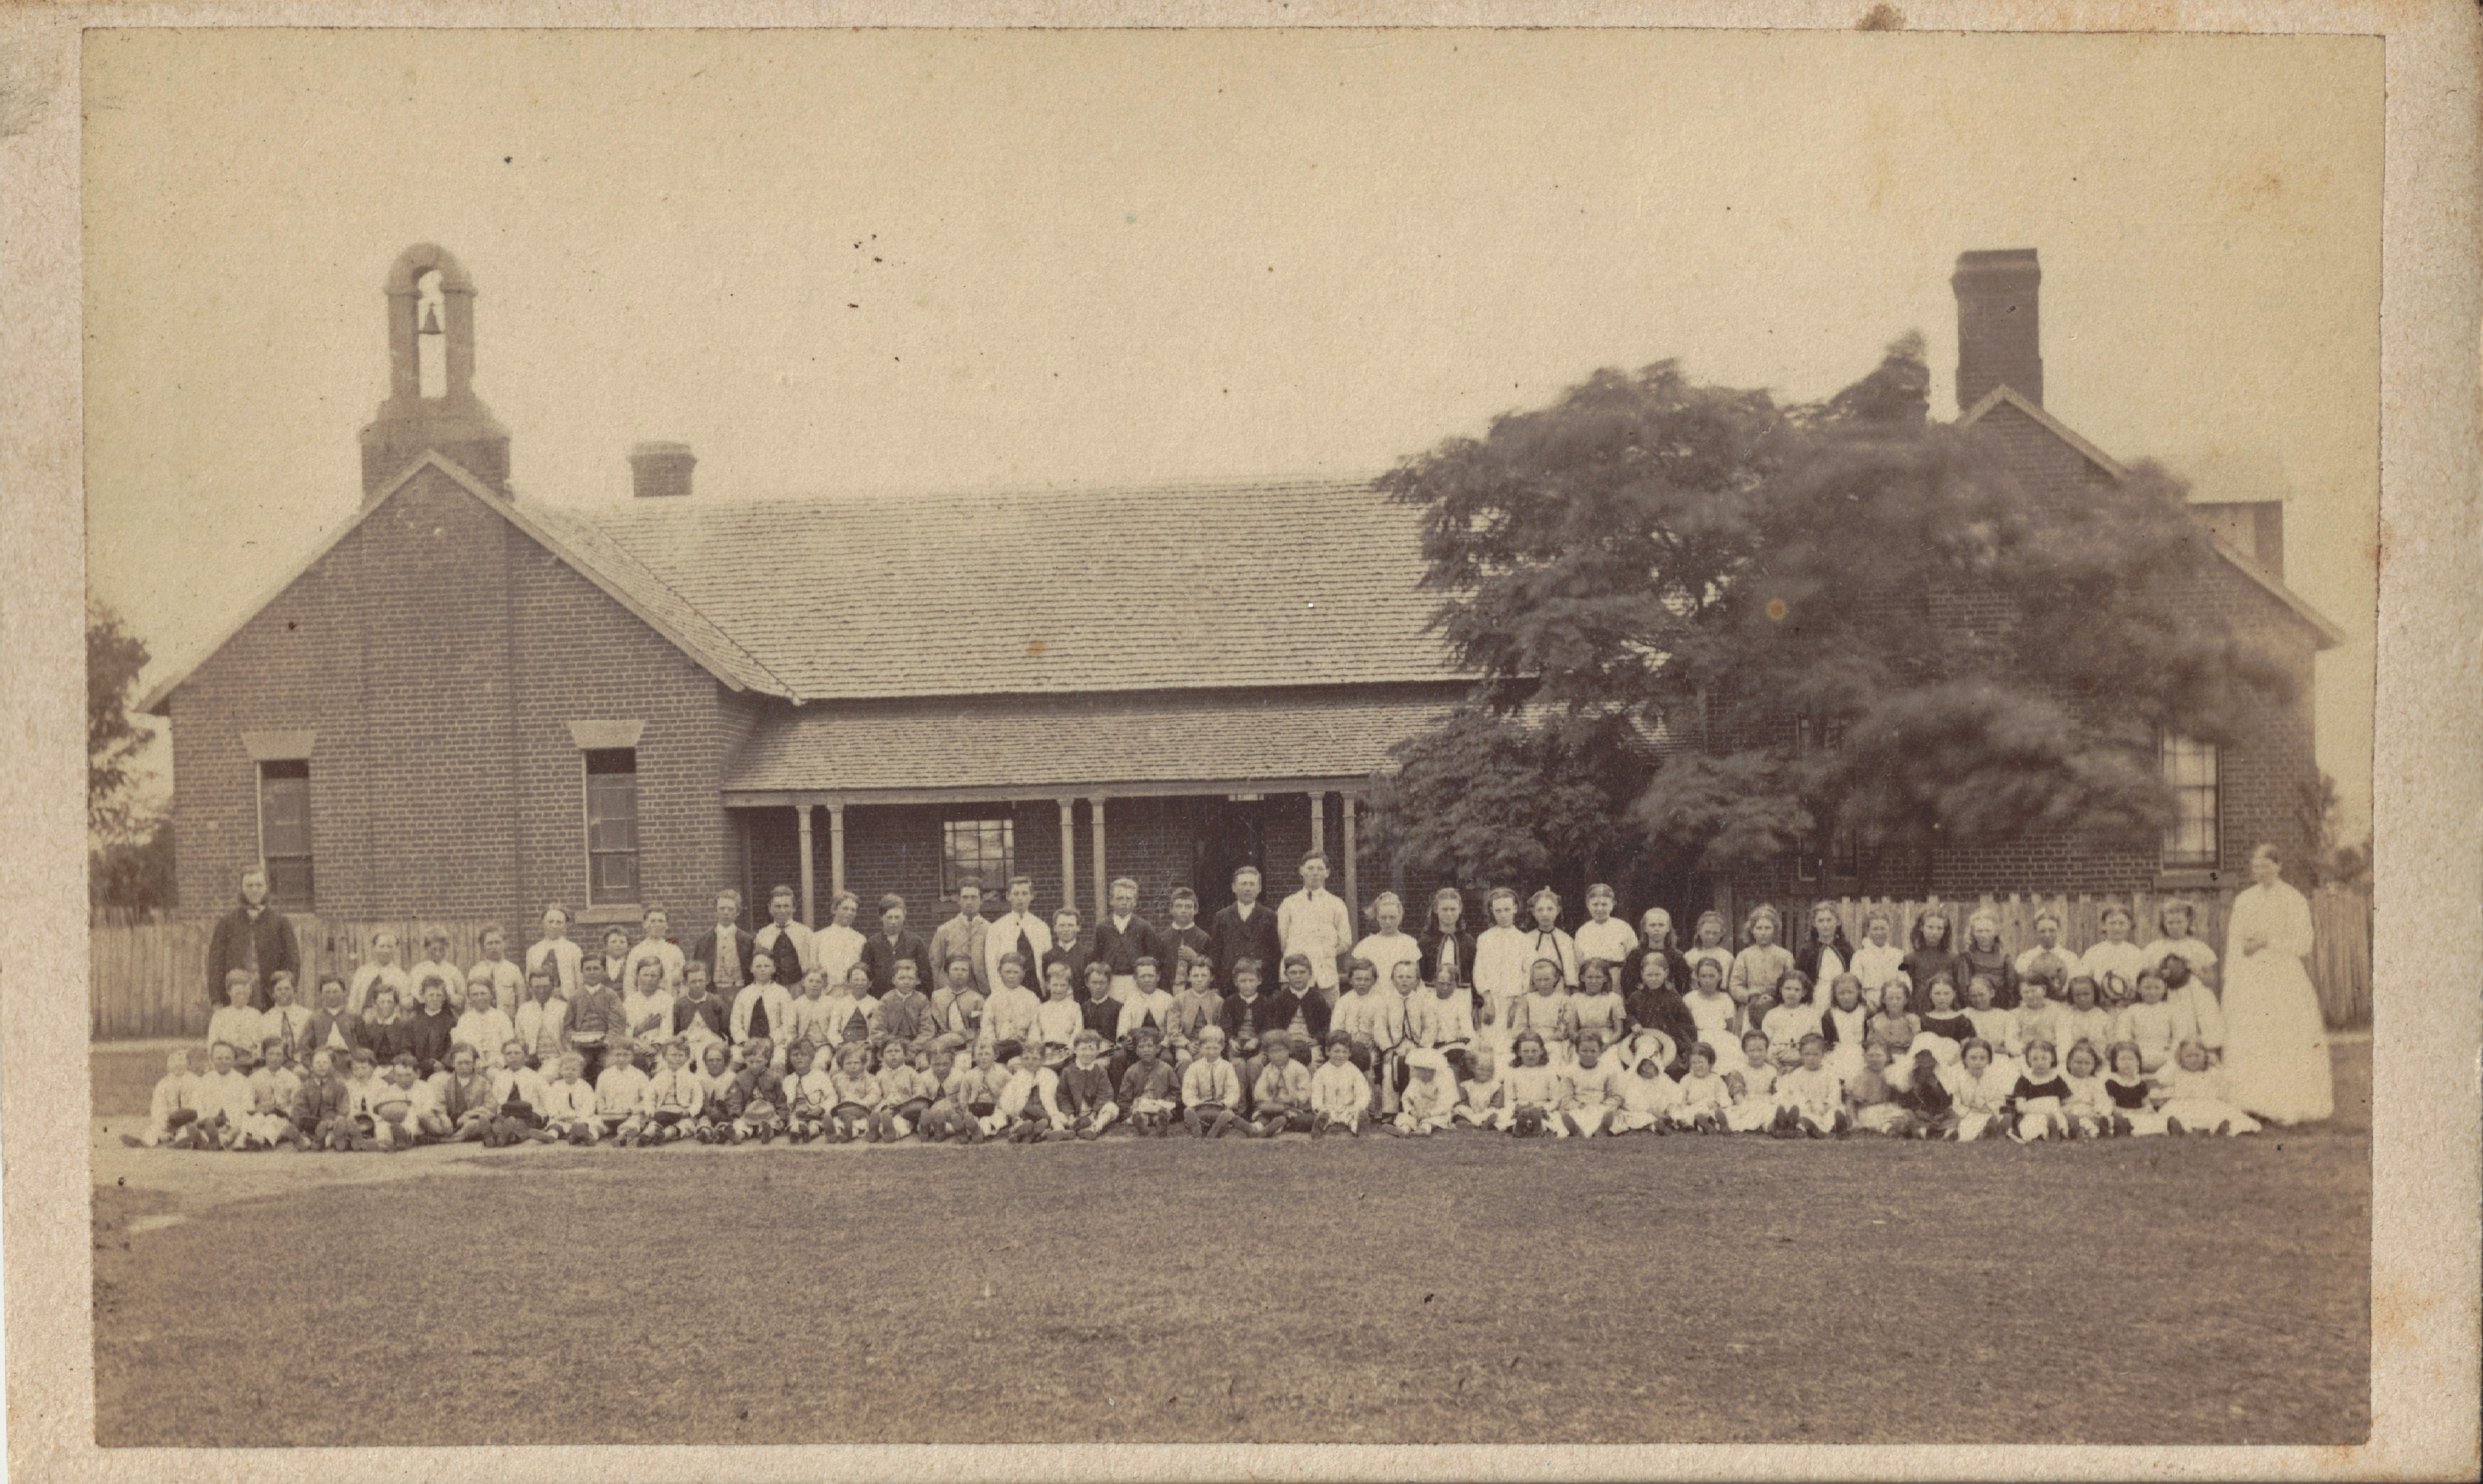 Newcastle School, circa 22 October - 1 December 1870. Photo Credit: Photographed by Beaufoy Merlin (No.51977) Digitised by Anne Glennie from the Glennie Family Albums)